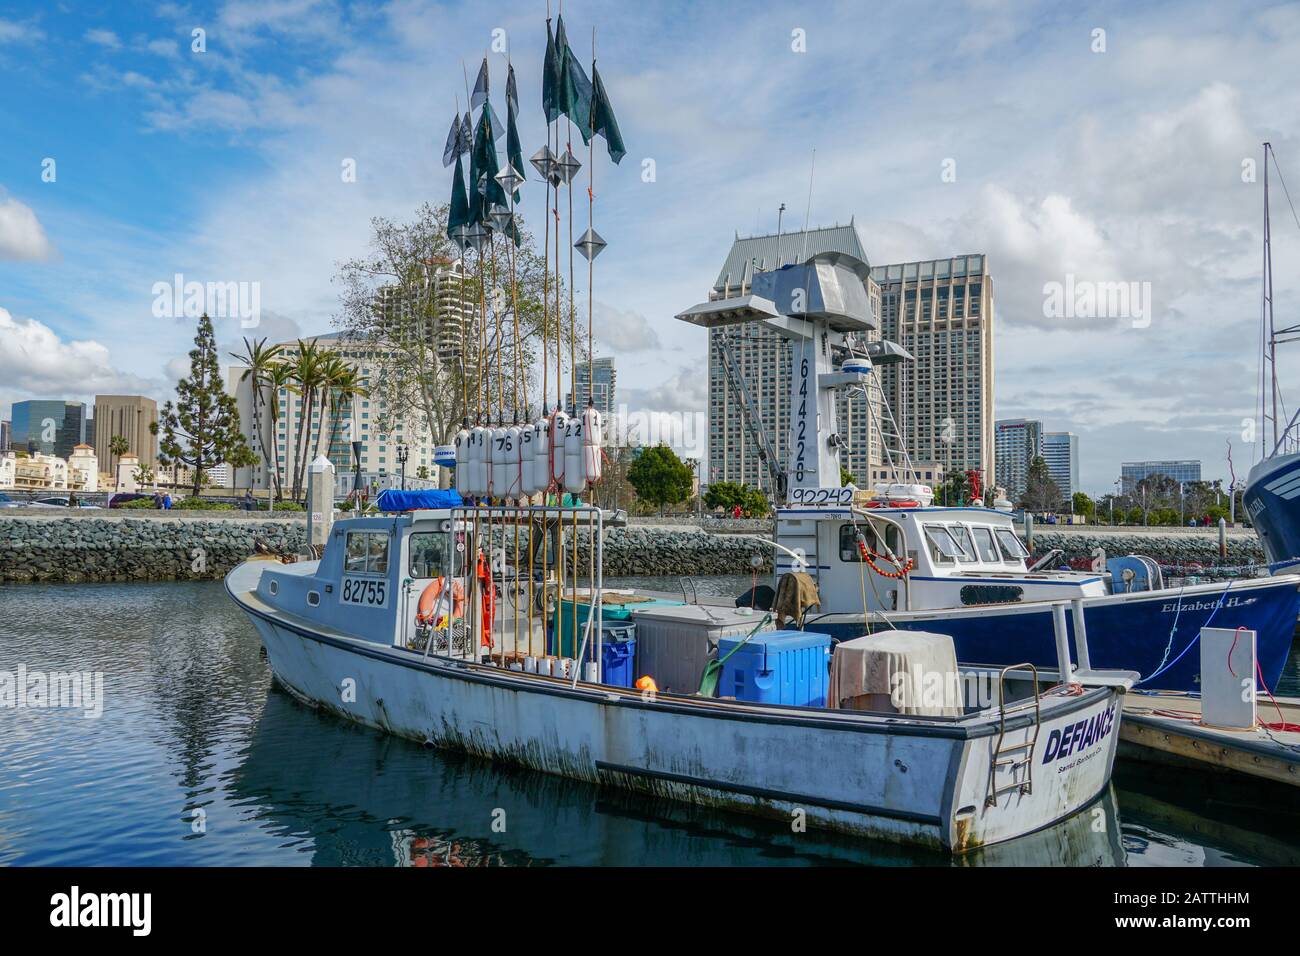 Commercial fishing boats docked in San Diego Harbor. Fish Harbor Pier Located in the downtown area of San Diego adjacent to seaport village. California, USA. January 19, 2020 Stock Photo